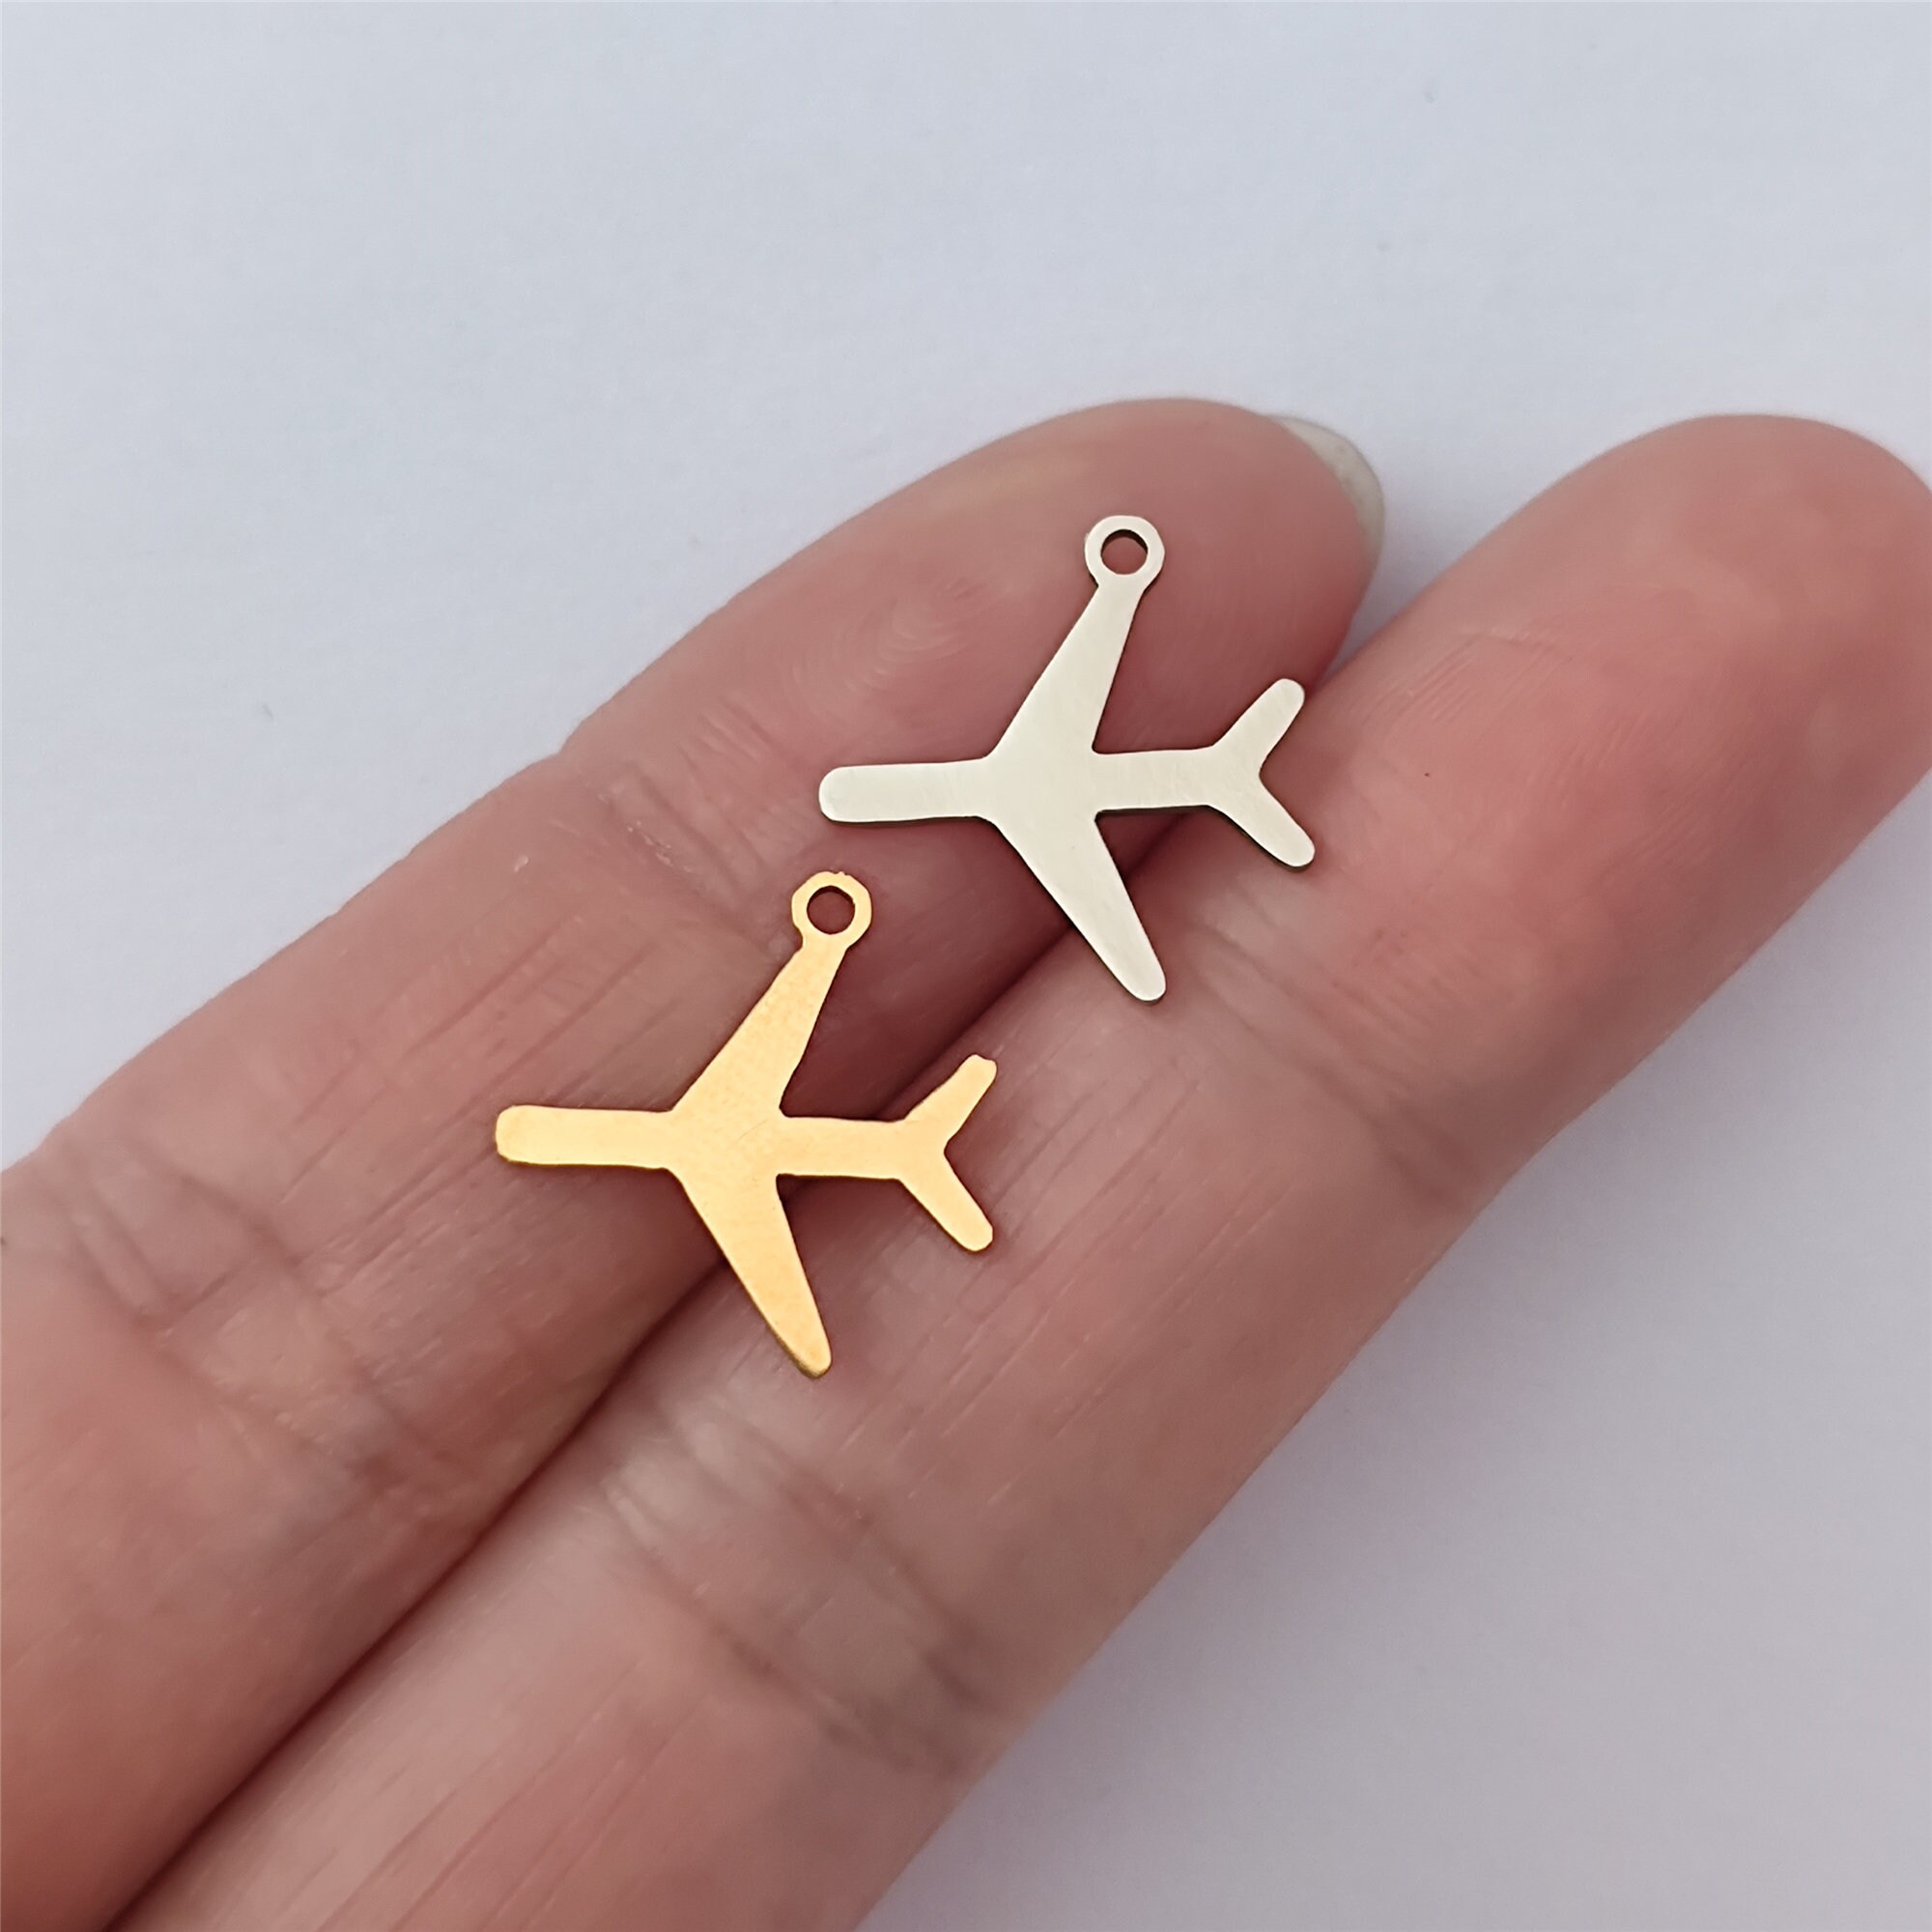 Plane Charm, Gold Filled, Sterling Silver, Permanent Jewelry Charms, Bulk  Gold Charms, Bulk Charms Silver, Wholesale Gold Charms, CH05 